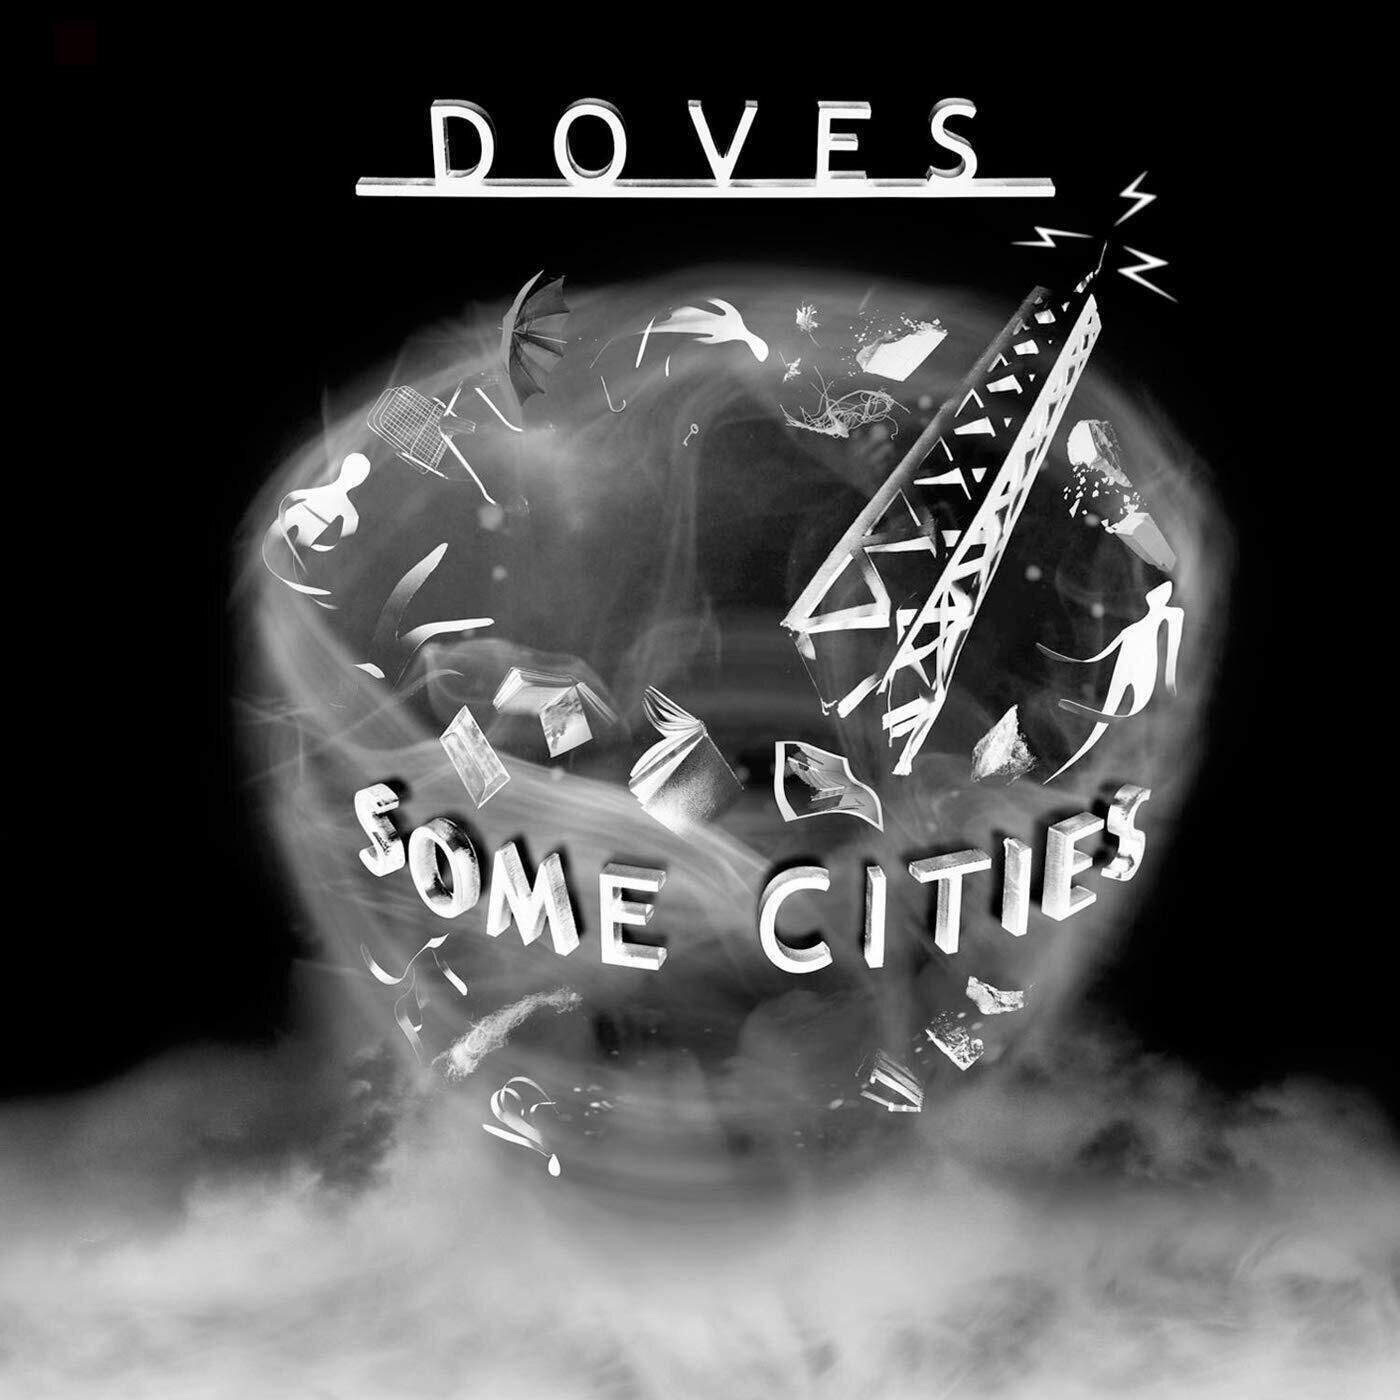 Vinylplade Doves - Some Cities (White Coloured) (Limited Edition) (2 LP)